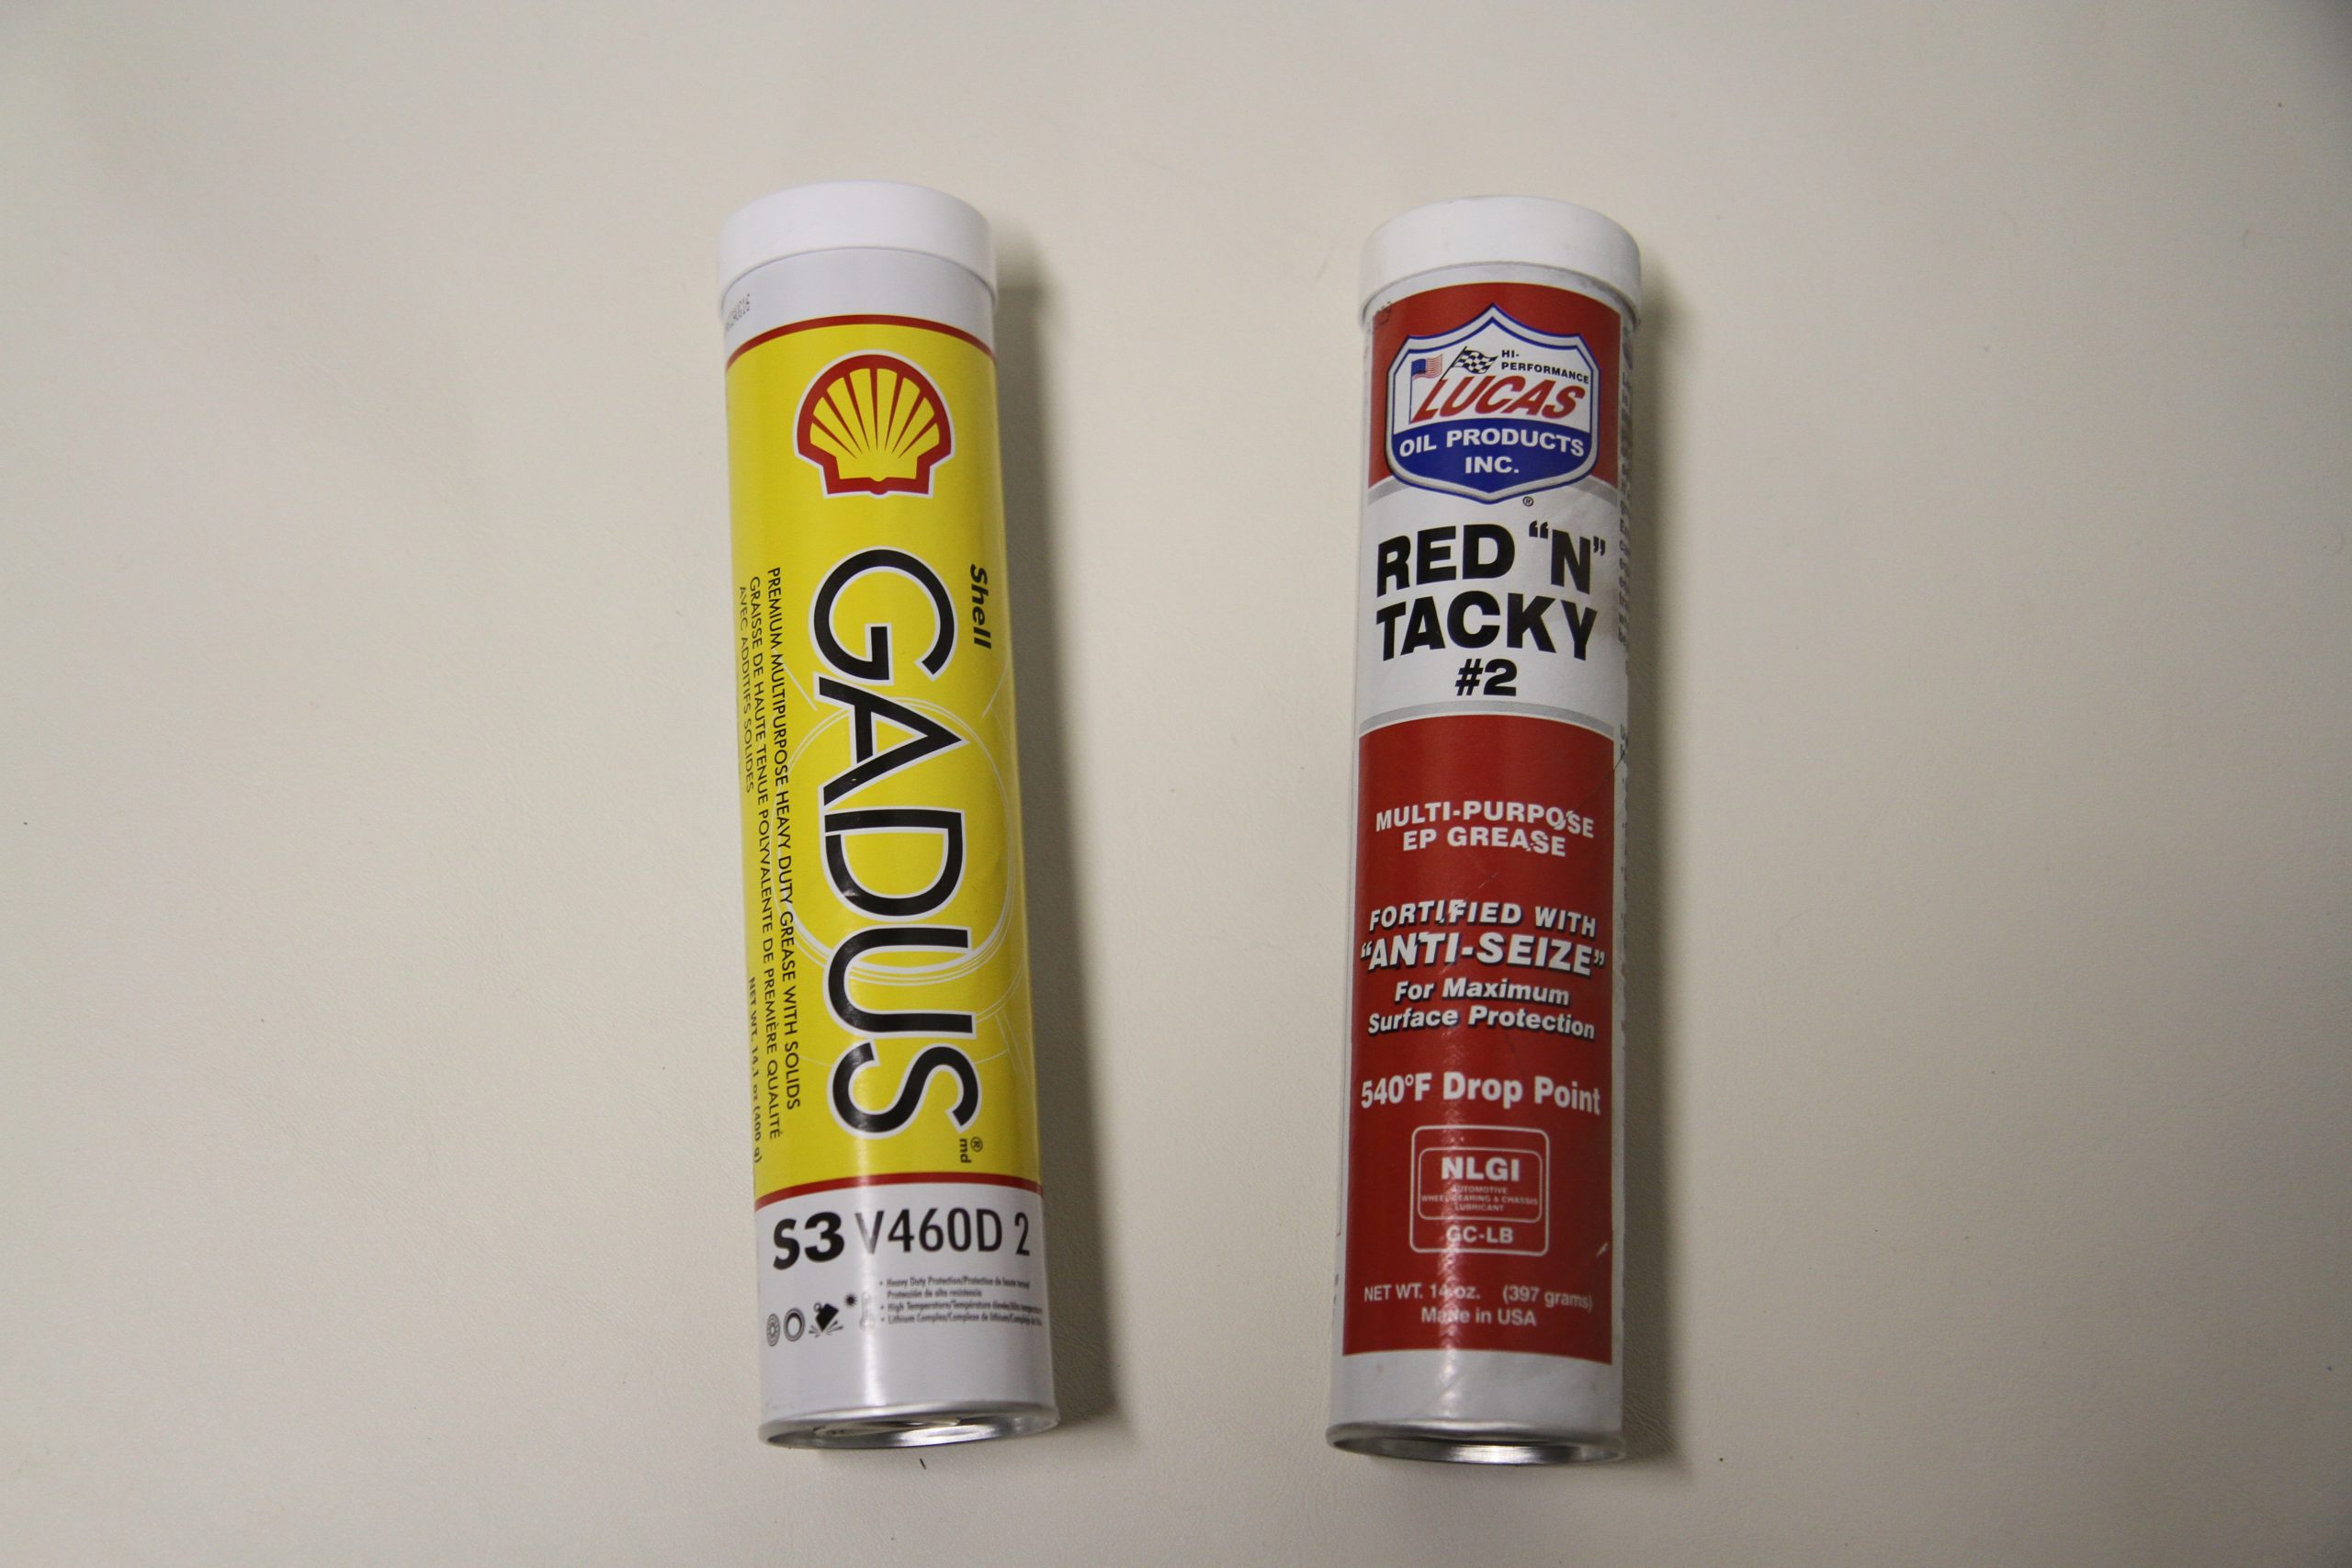 Side by side of Shell's Gadus moly grease and Lucas Oil's Red n' Tacky.